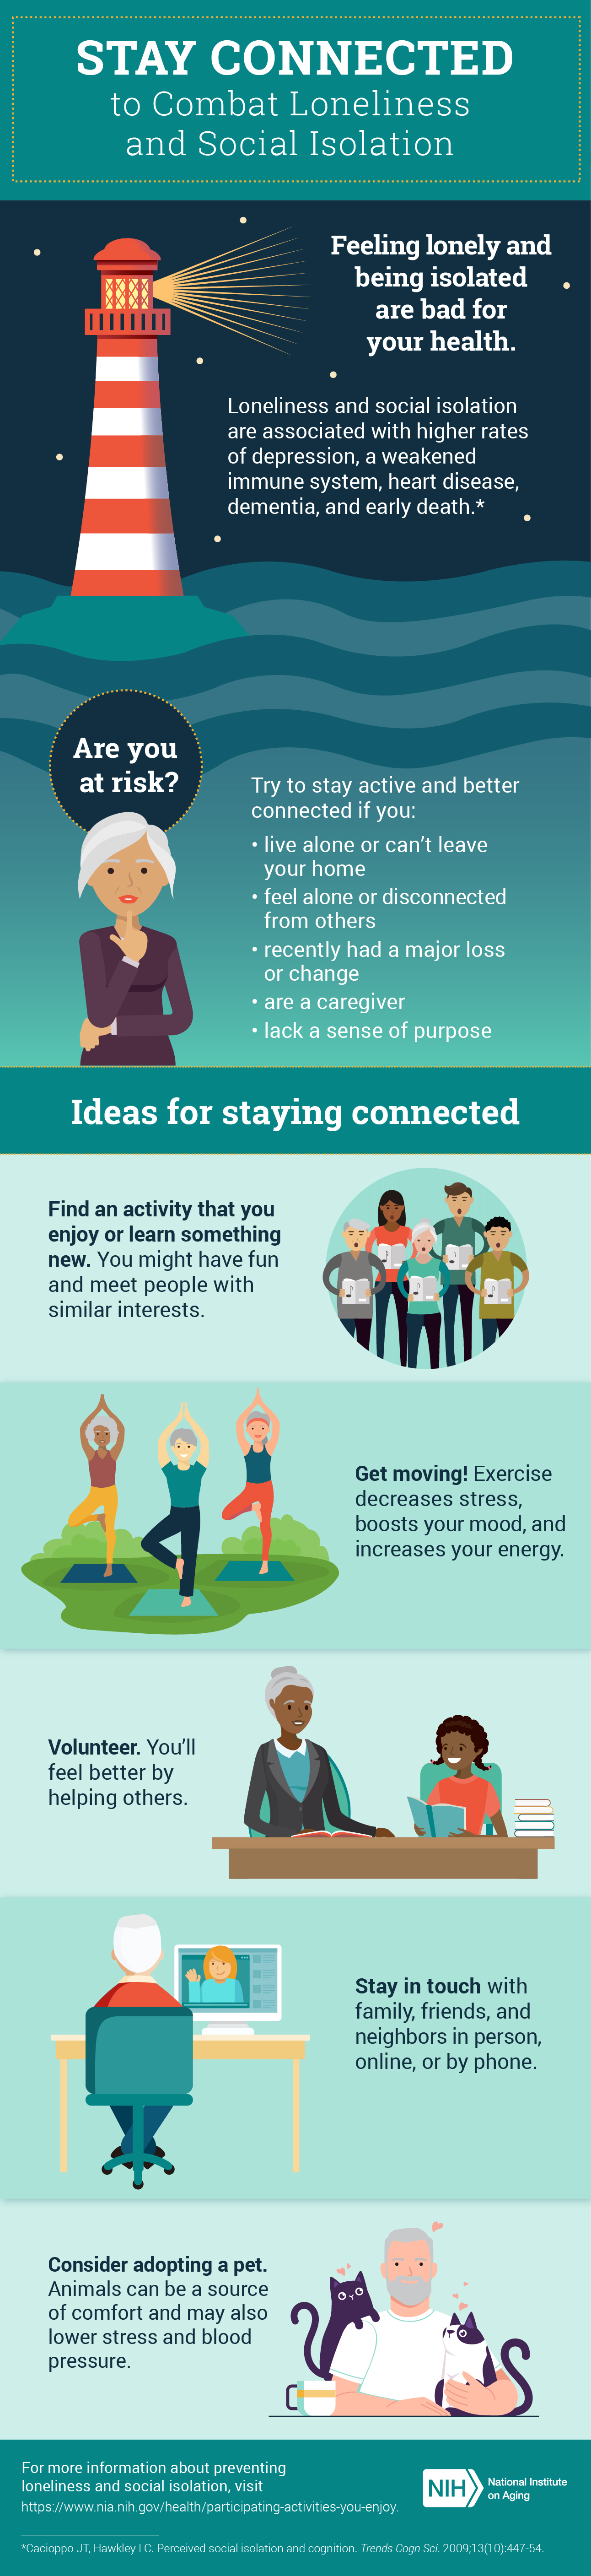 Infographic, Stay Connected to Combat Loneliness and Social Isolation